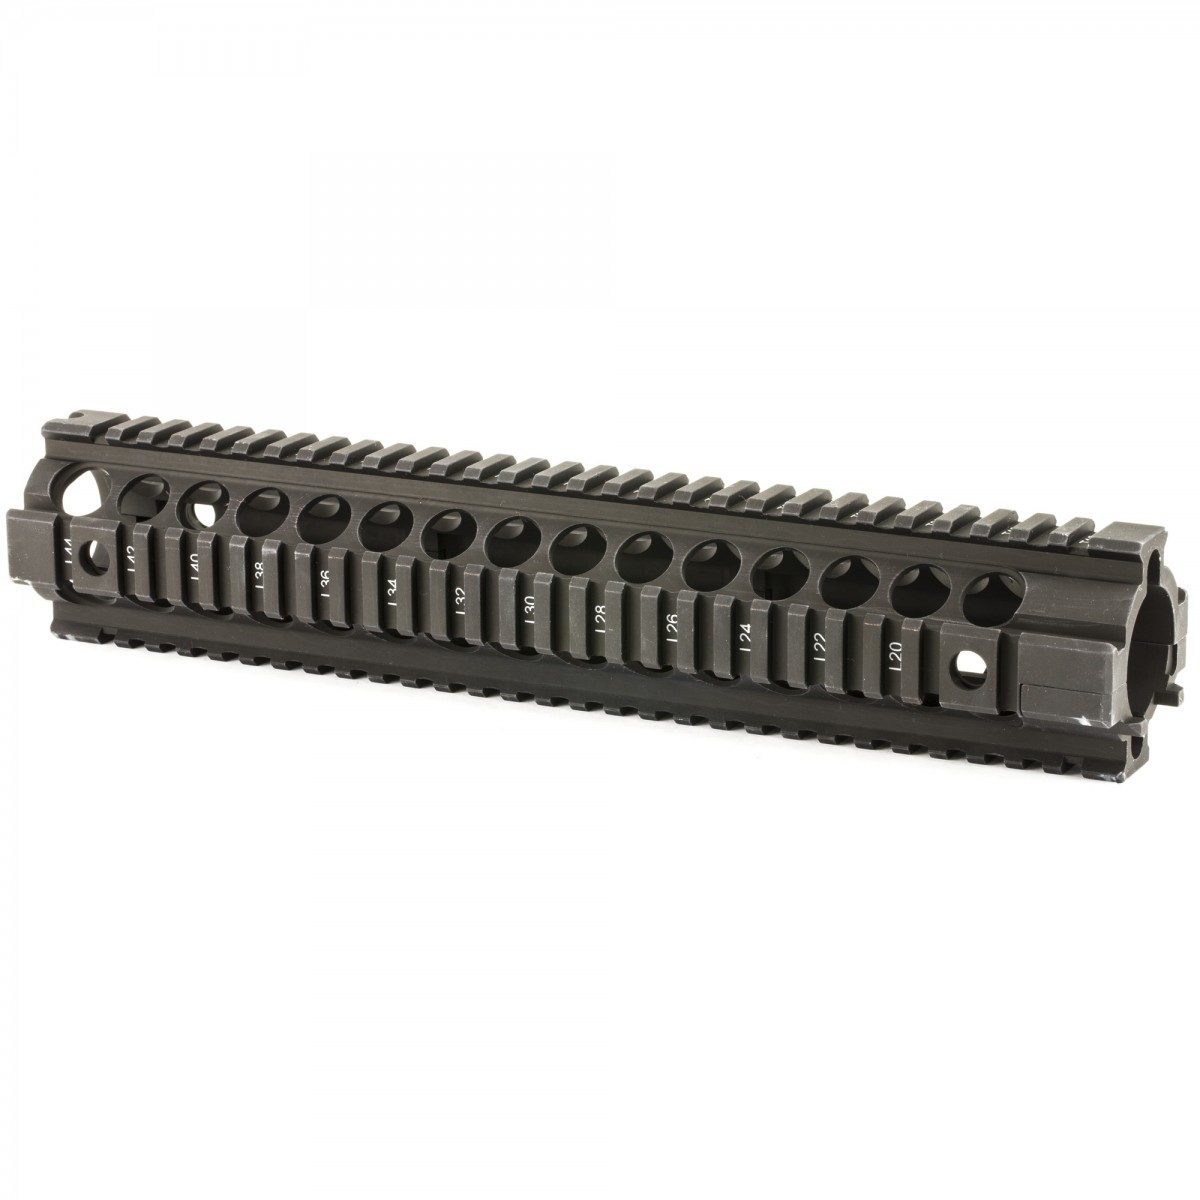 Midwest Industries Gen2 Two Piece Free Float Rifle-Length Handguard